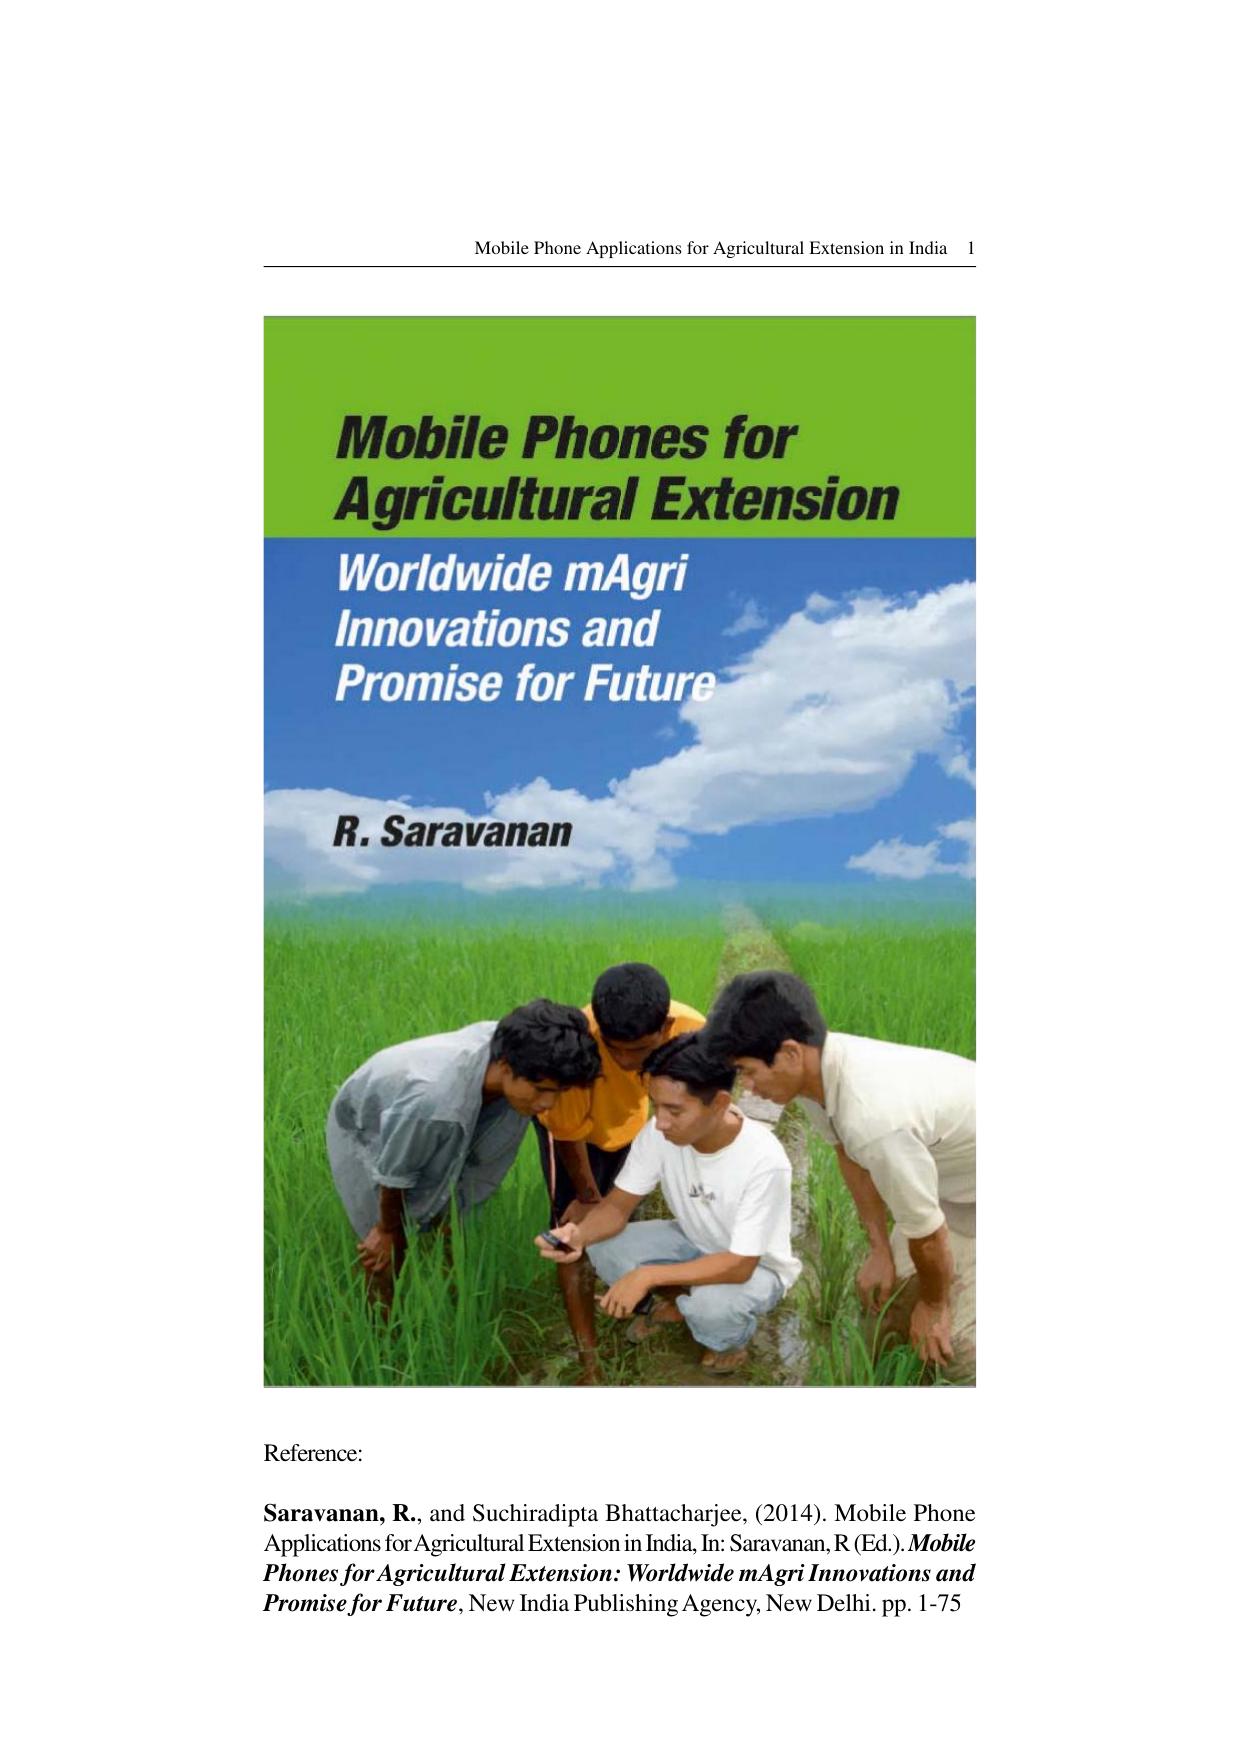 Mobile Phones for Agricultural Extension 2014